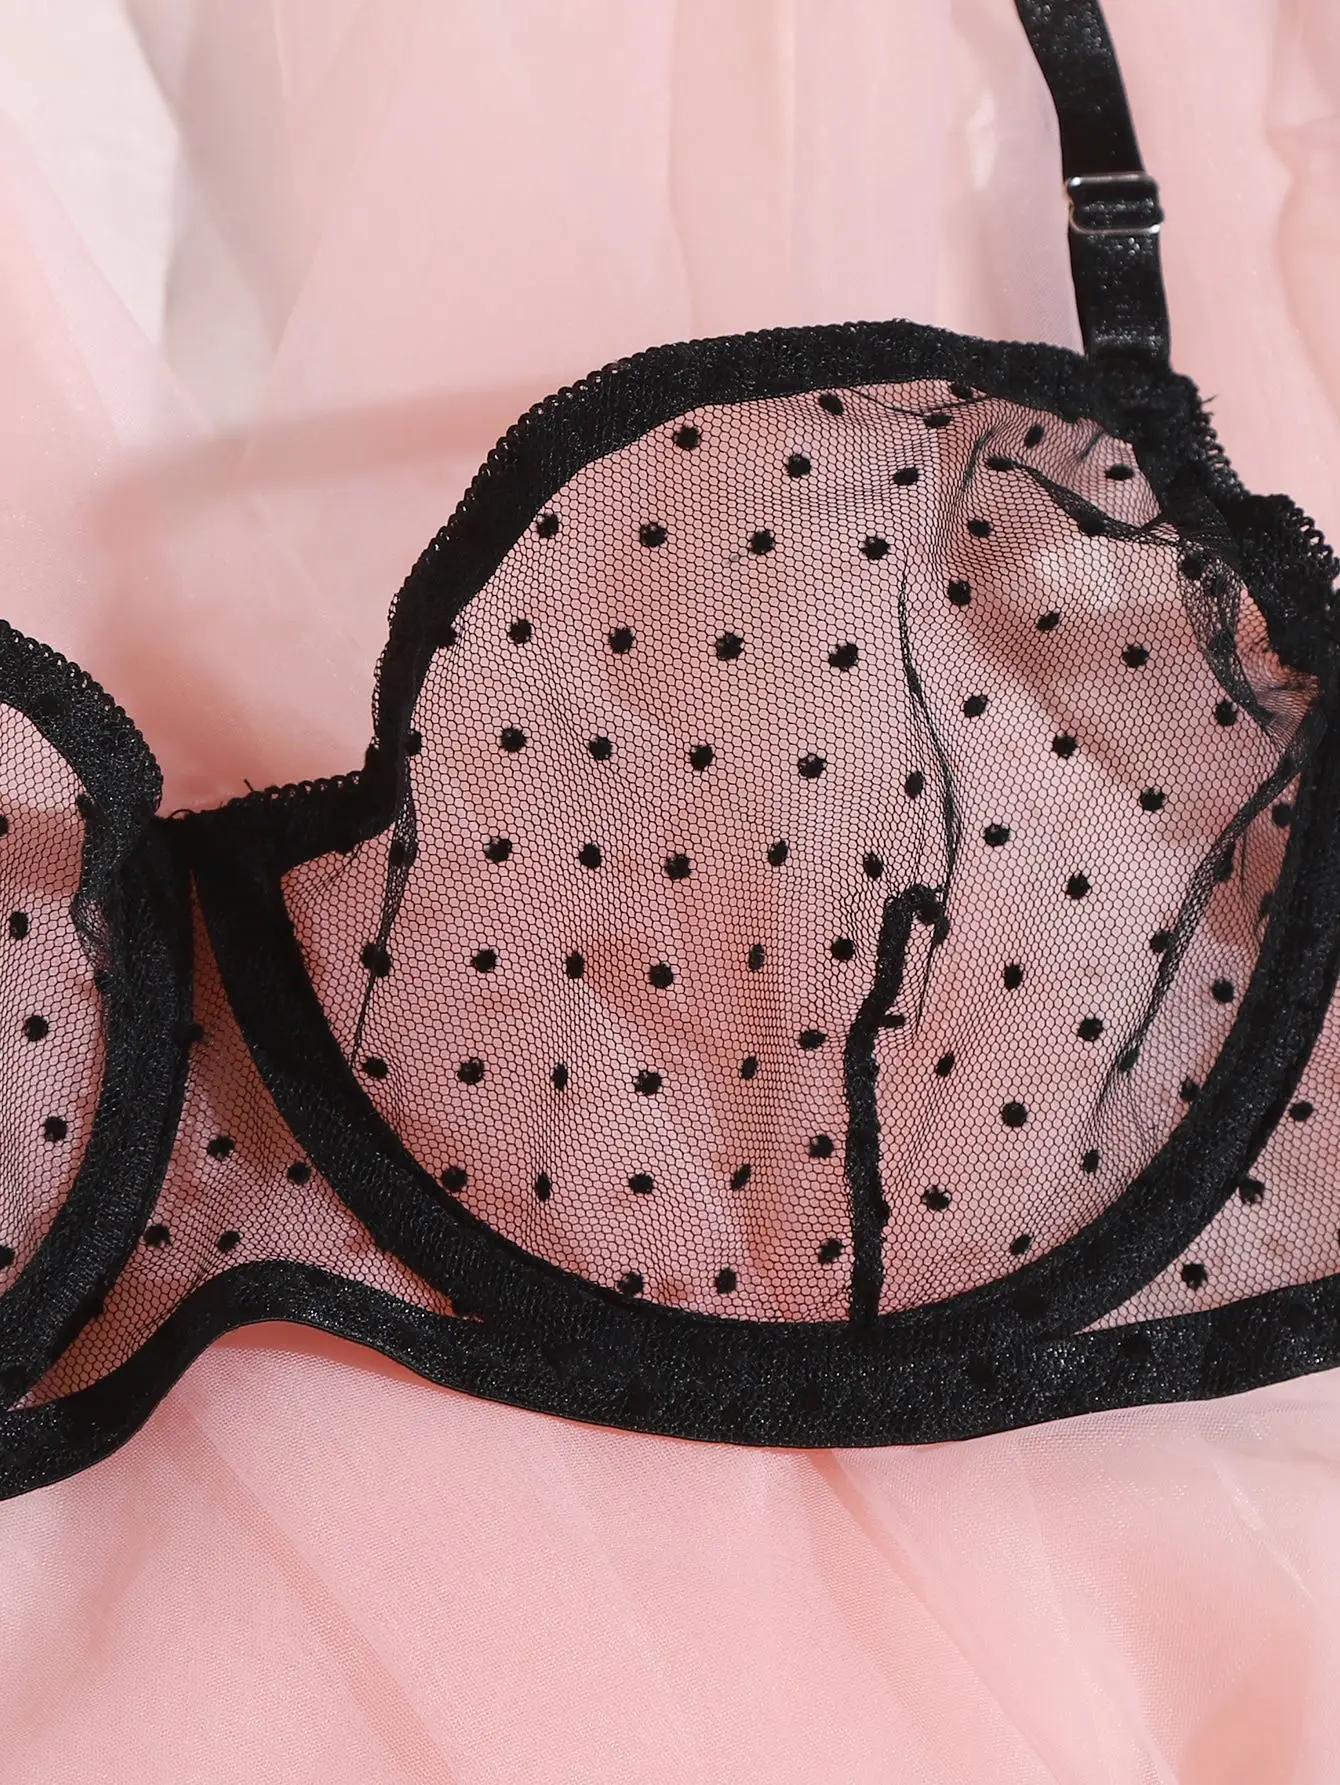 sexy bra panty Dot Mesh Lace Lingerie Set Underwire See Through Brassiere Sexy Underwear Bra and Panty Transparent Intimate bra and thong set